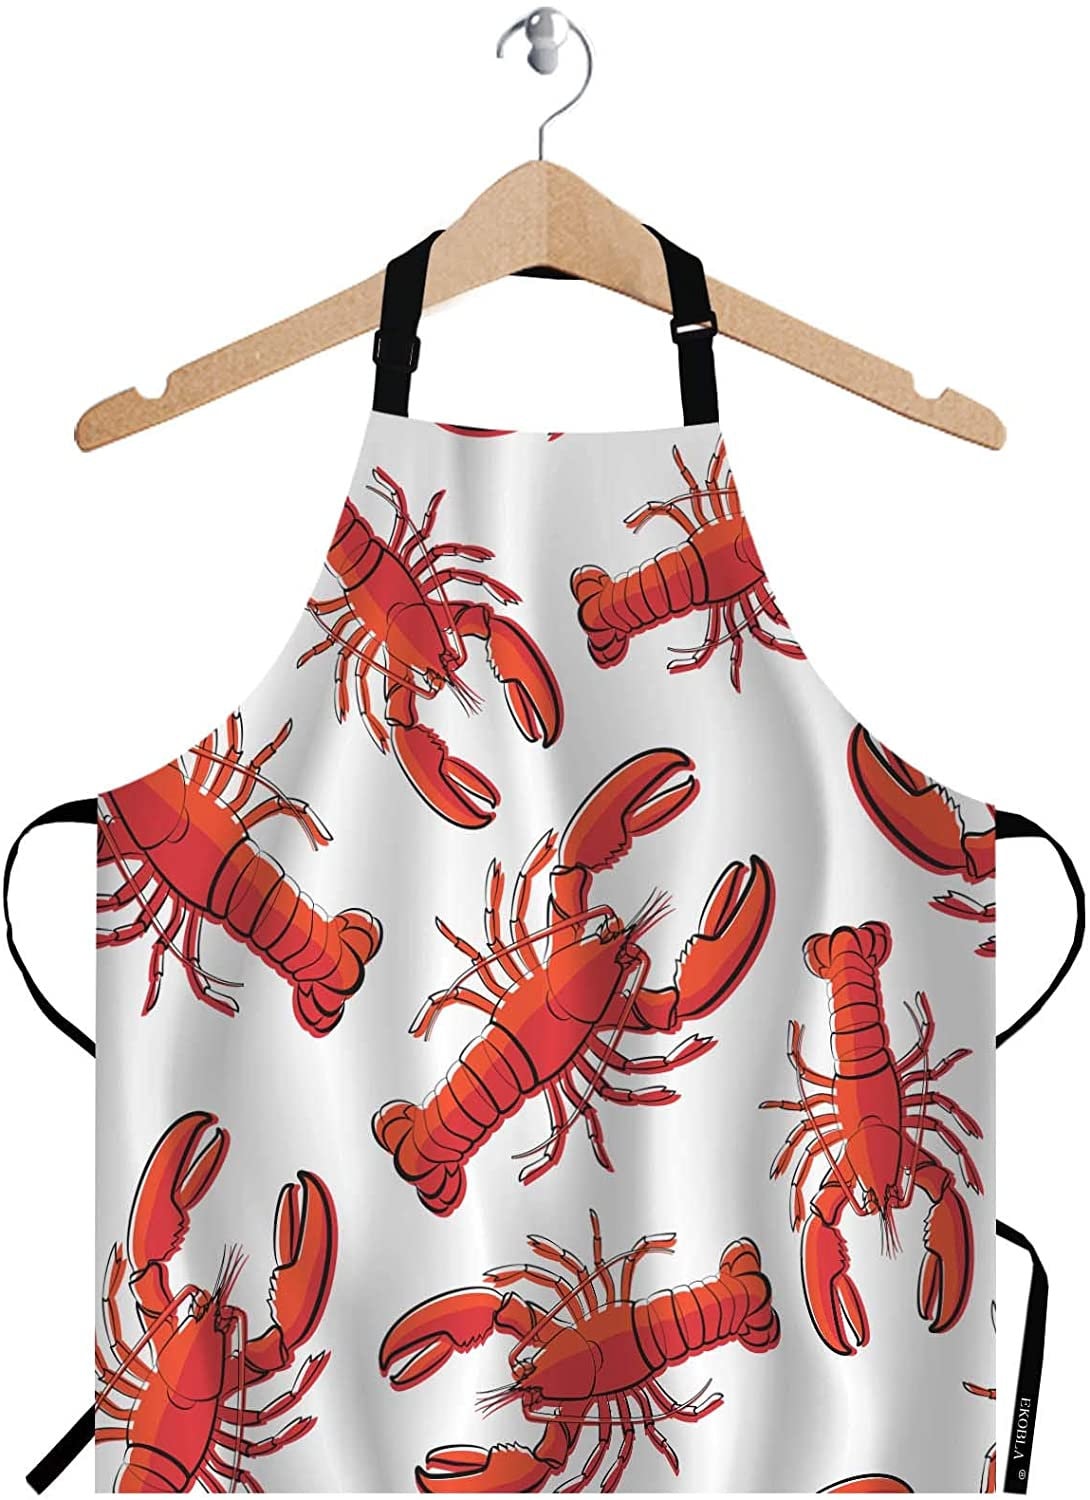 Crawfish Lobsters Aprons Red Nautical Decorative Crayfish Seafood Waterproof Resistant Chef Boil Party Supplies Decorations Crab